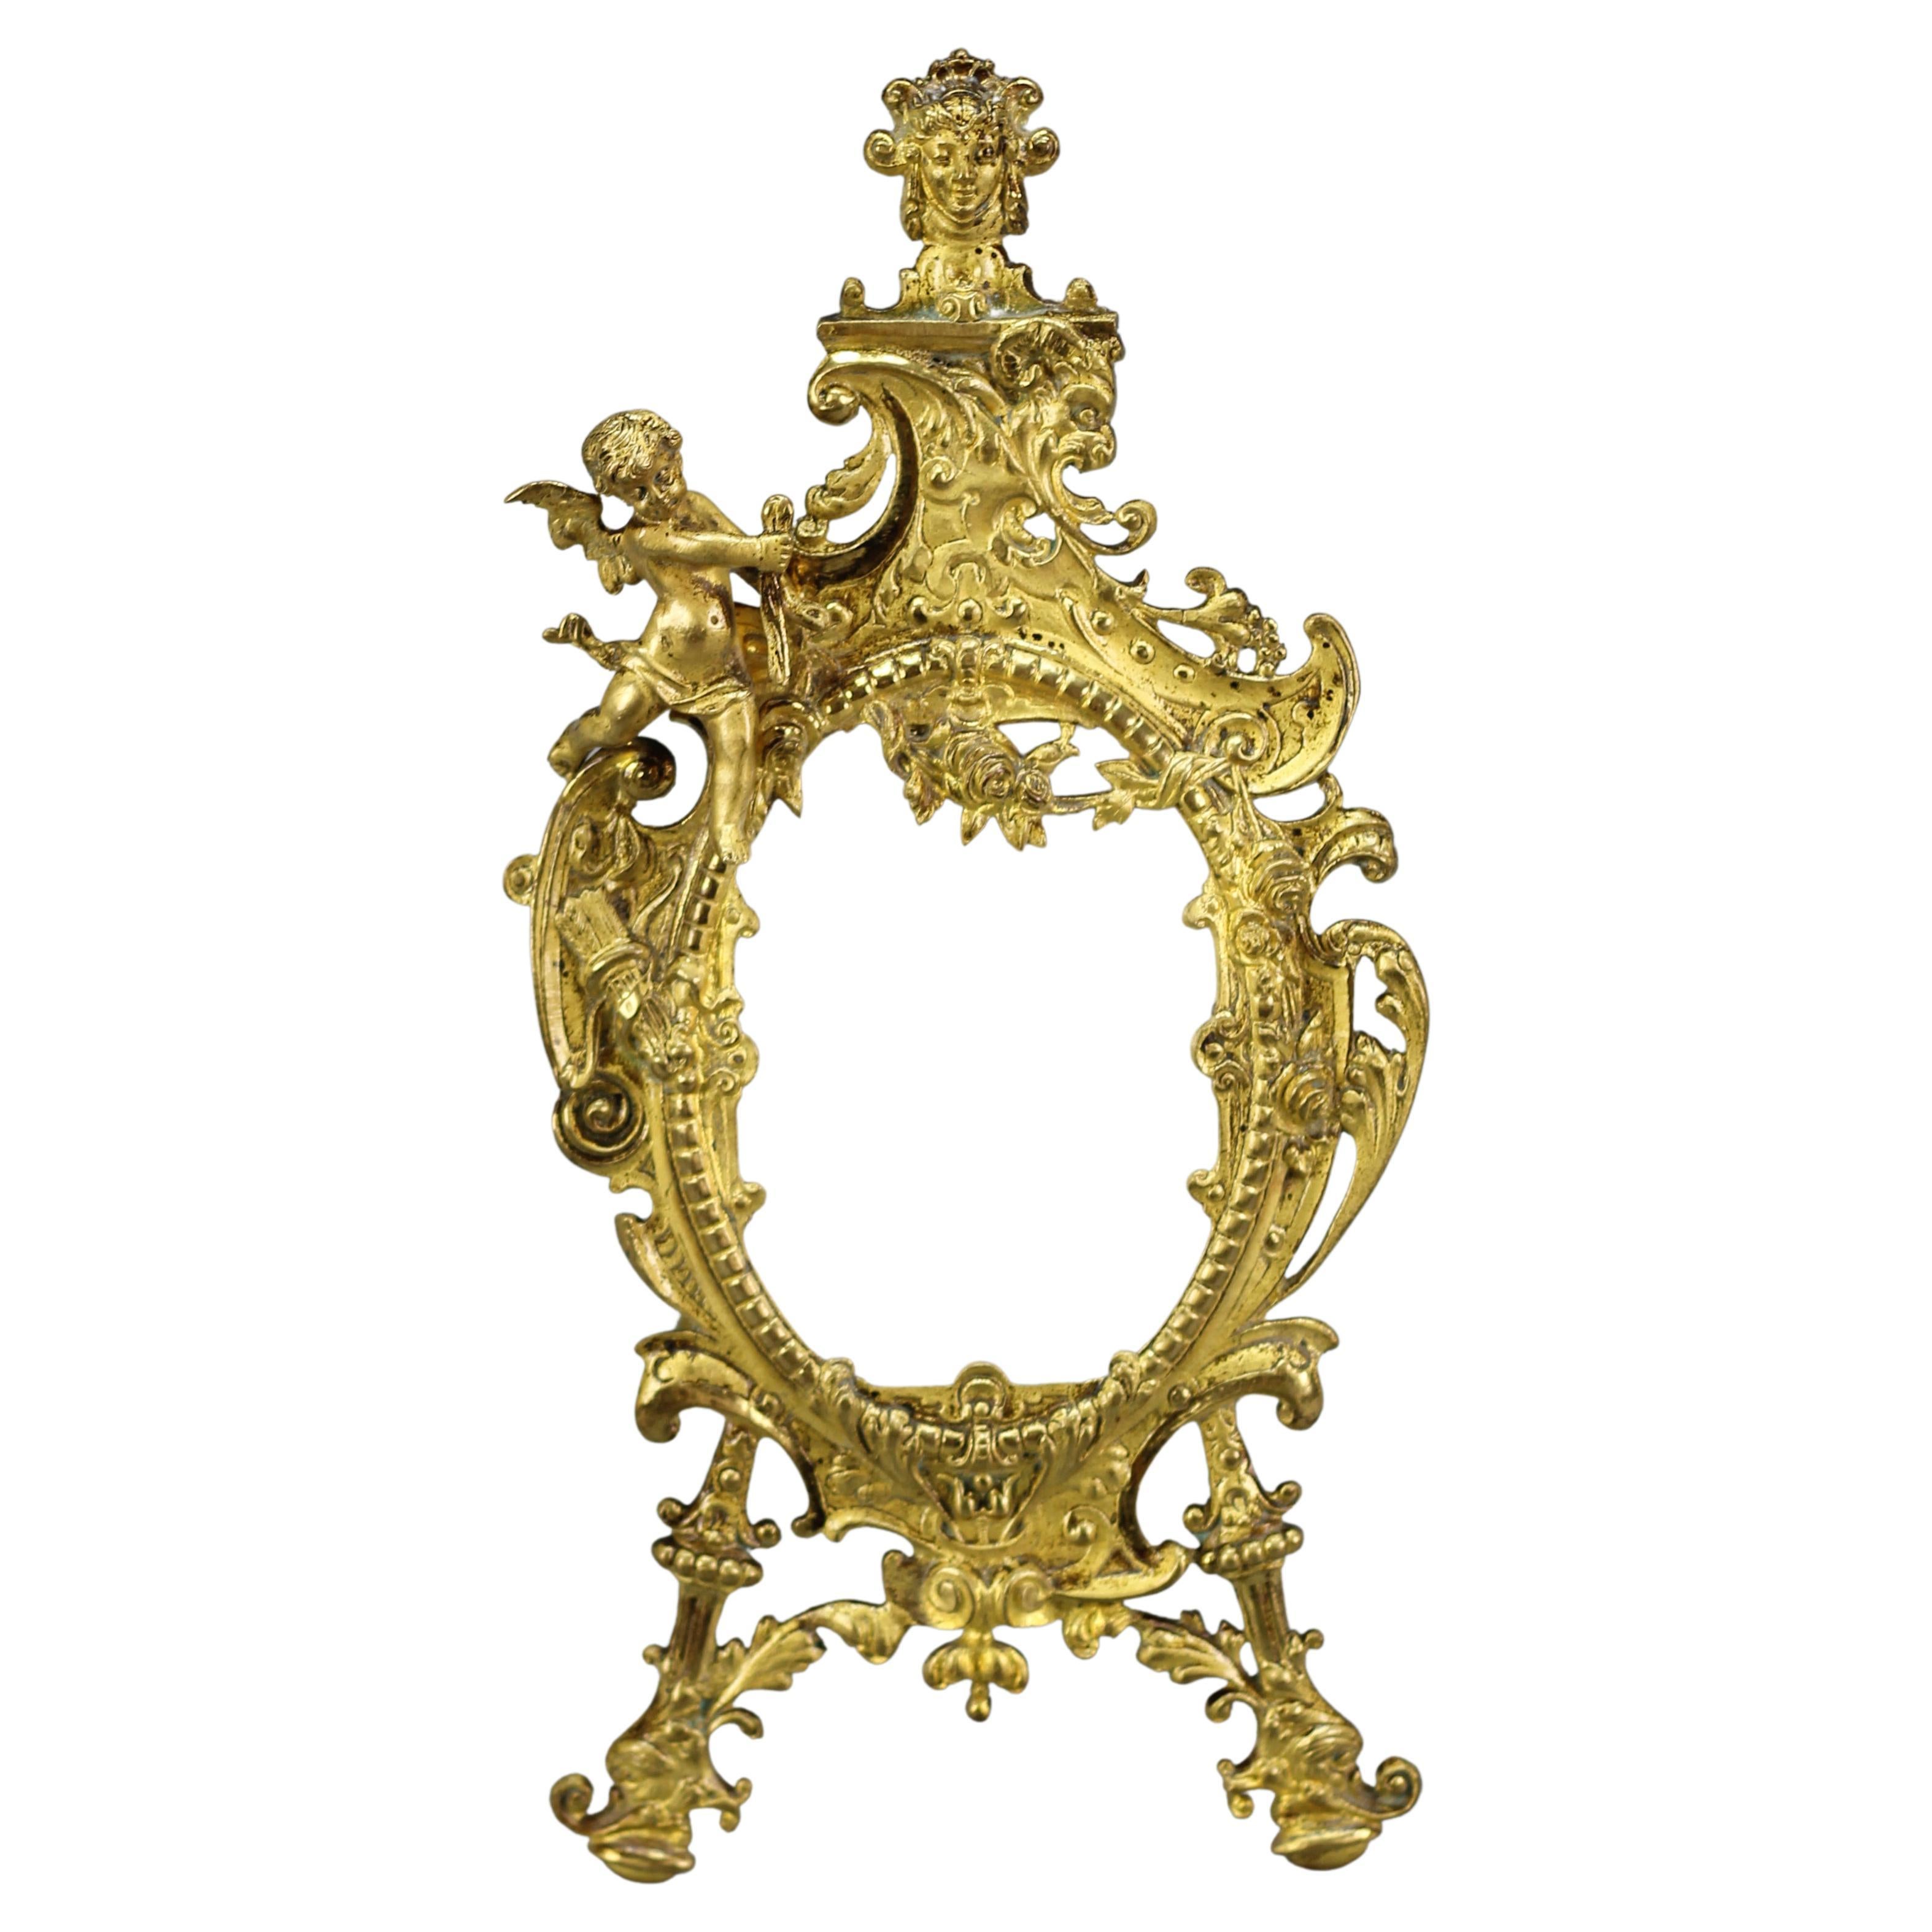 Neoclassical Style Gilt Bronze Picture Frame with Cherub, France, Late 19th C